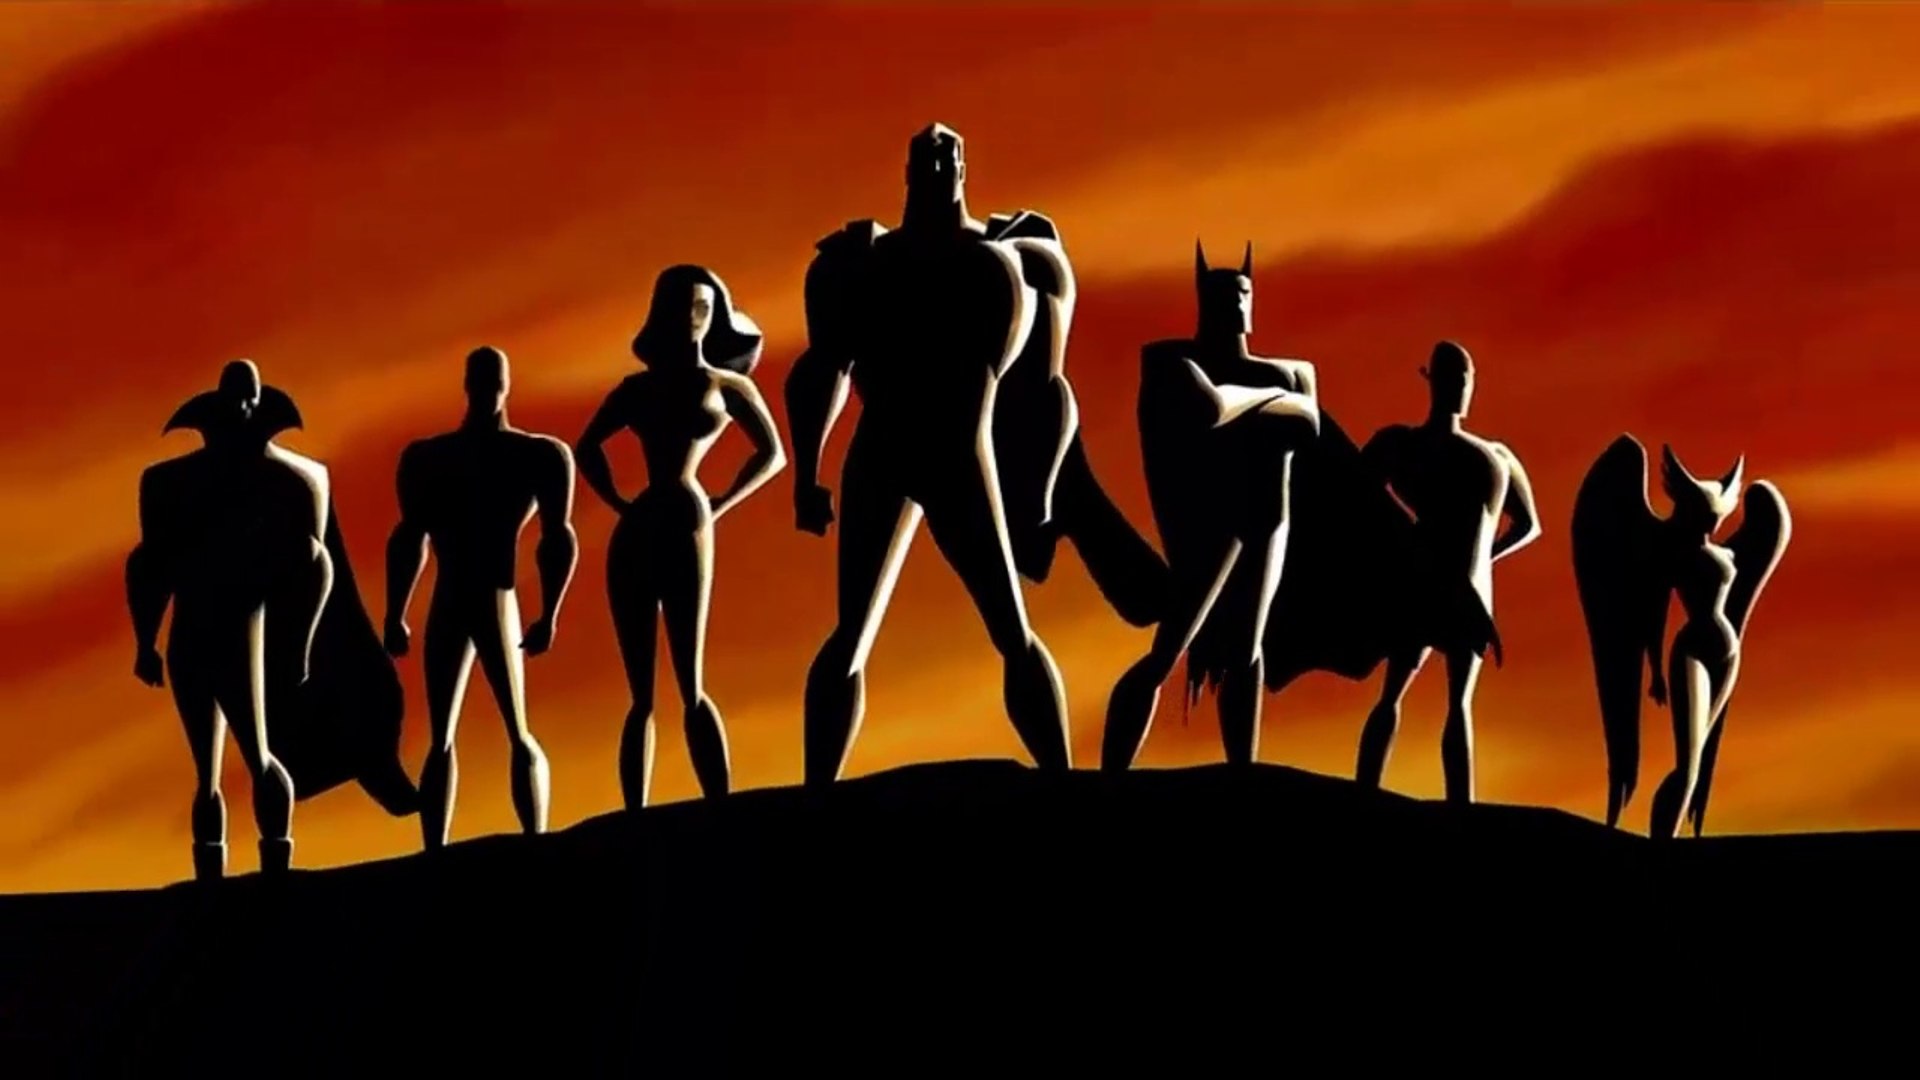 Justice League: Injustice for All